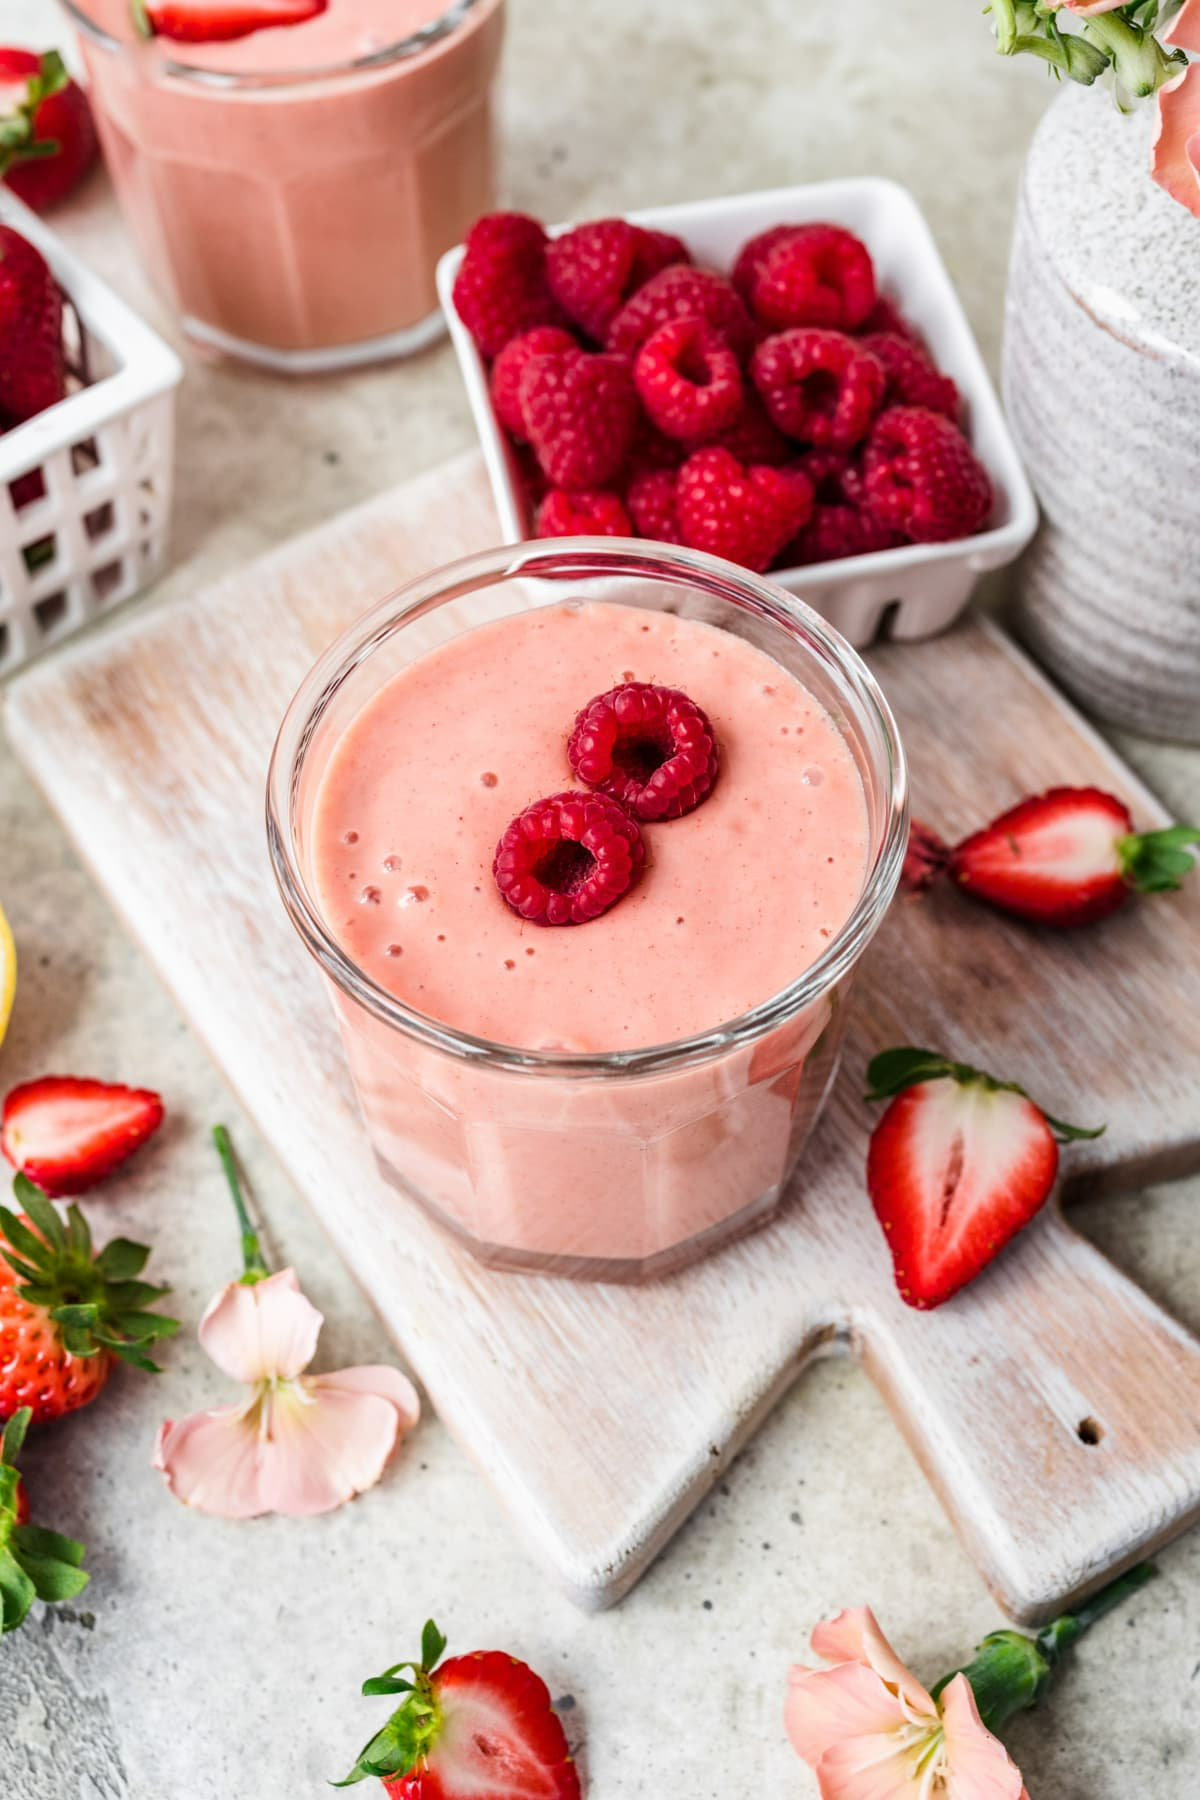 whizz up a healthy homemade smoothie